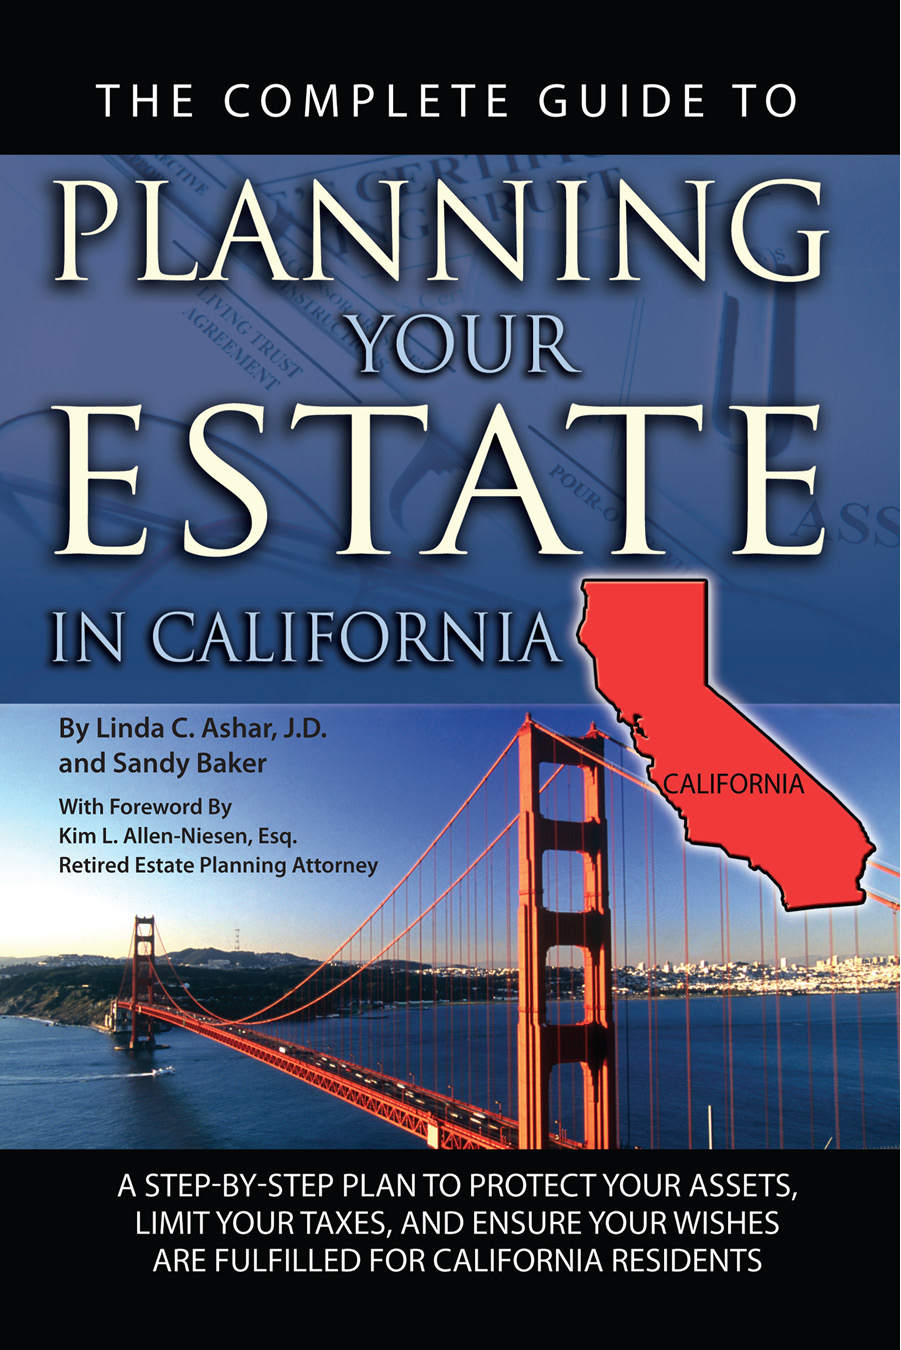 The Complete Guide to Planning Your Estate In California A Step-By-Step Plan - photo 1